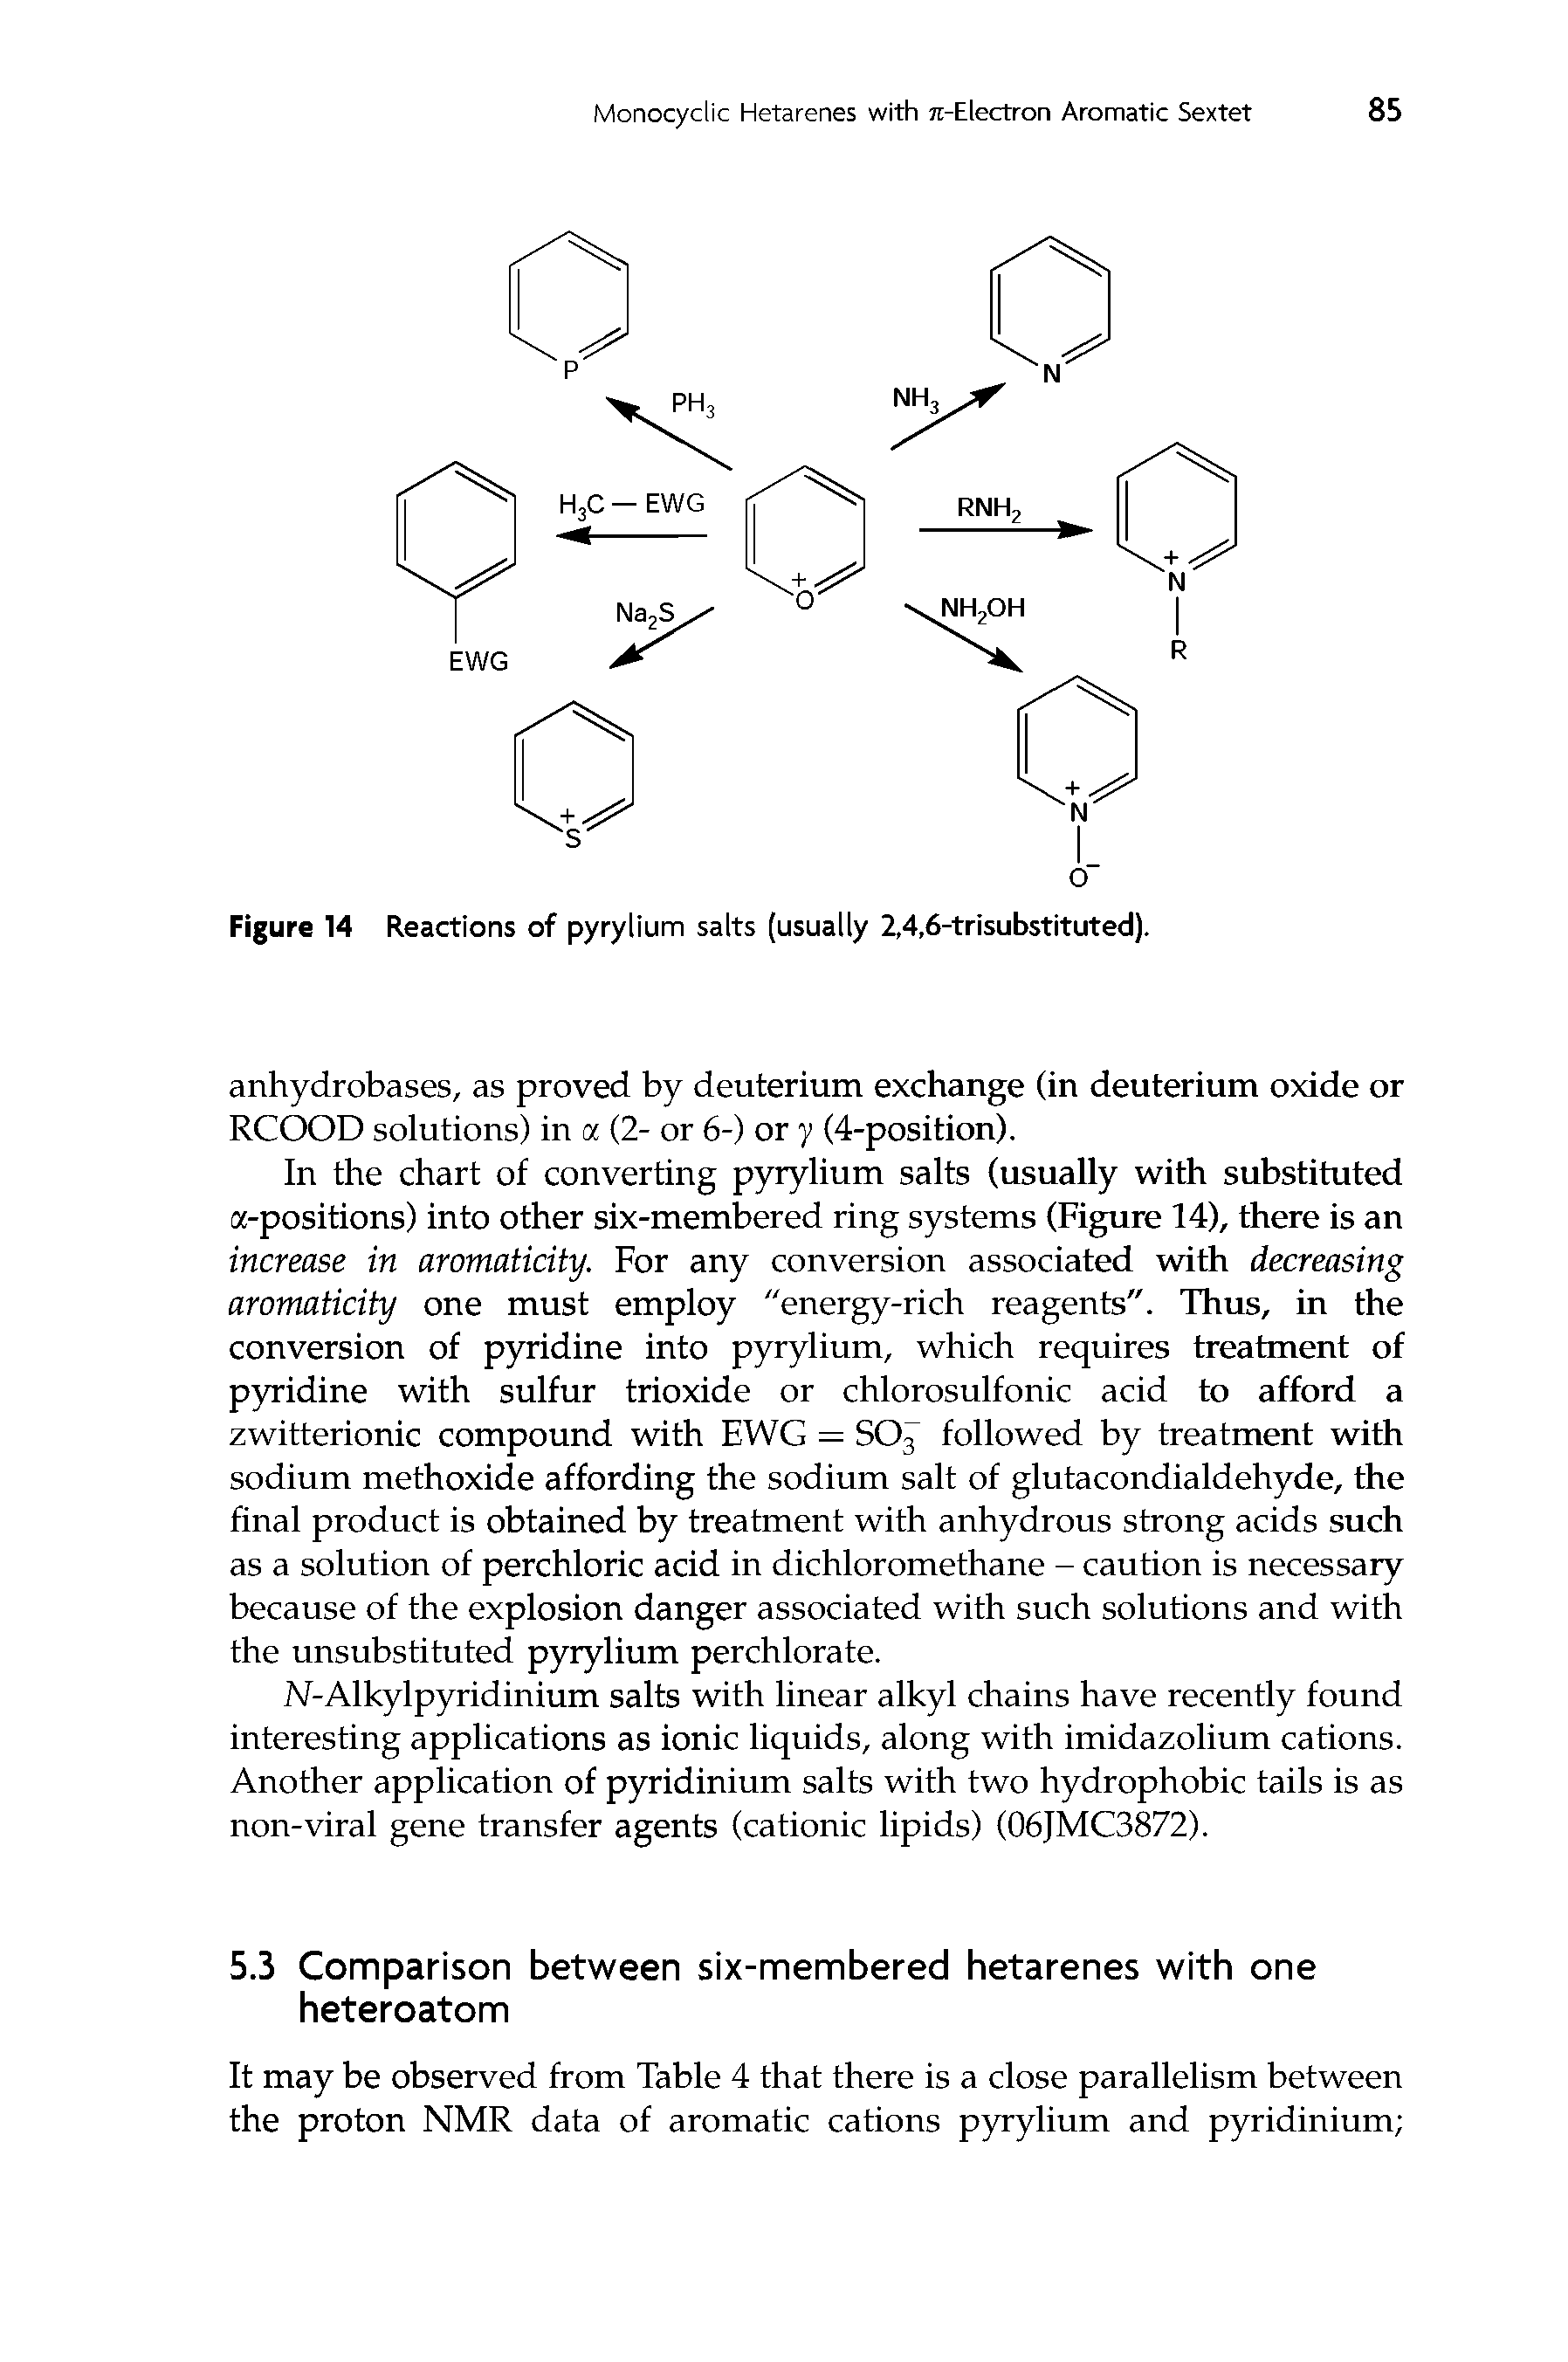 Figure 14 Reactions of pyrylium salts (usually 2,4,6-trisubstituted).